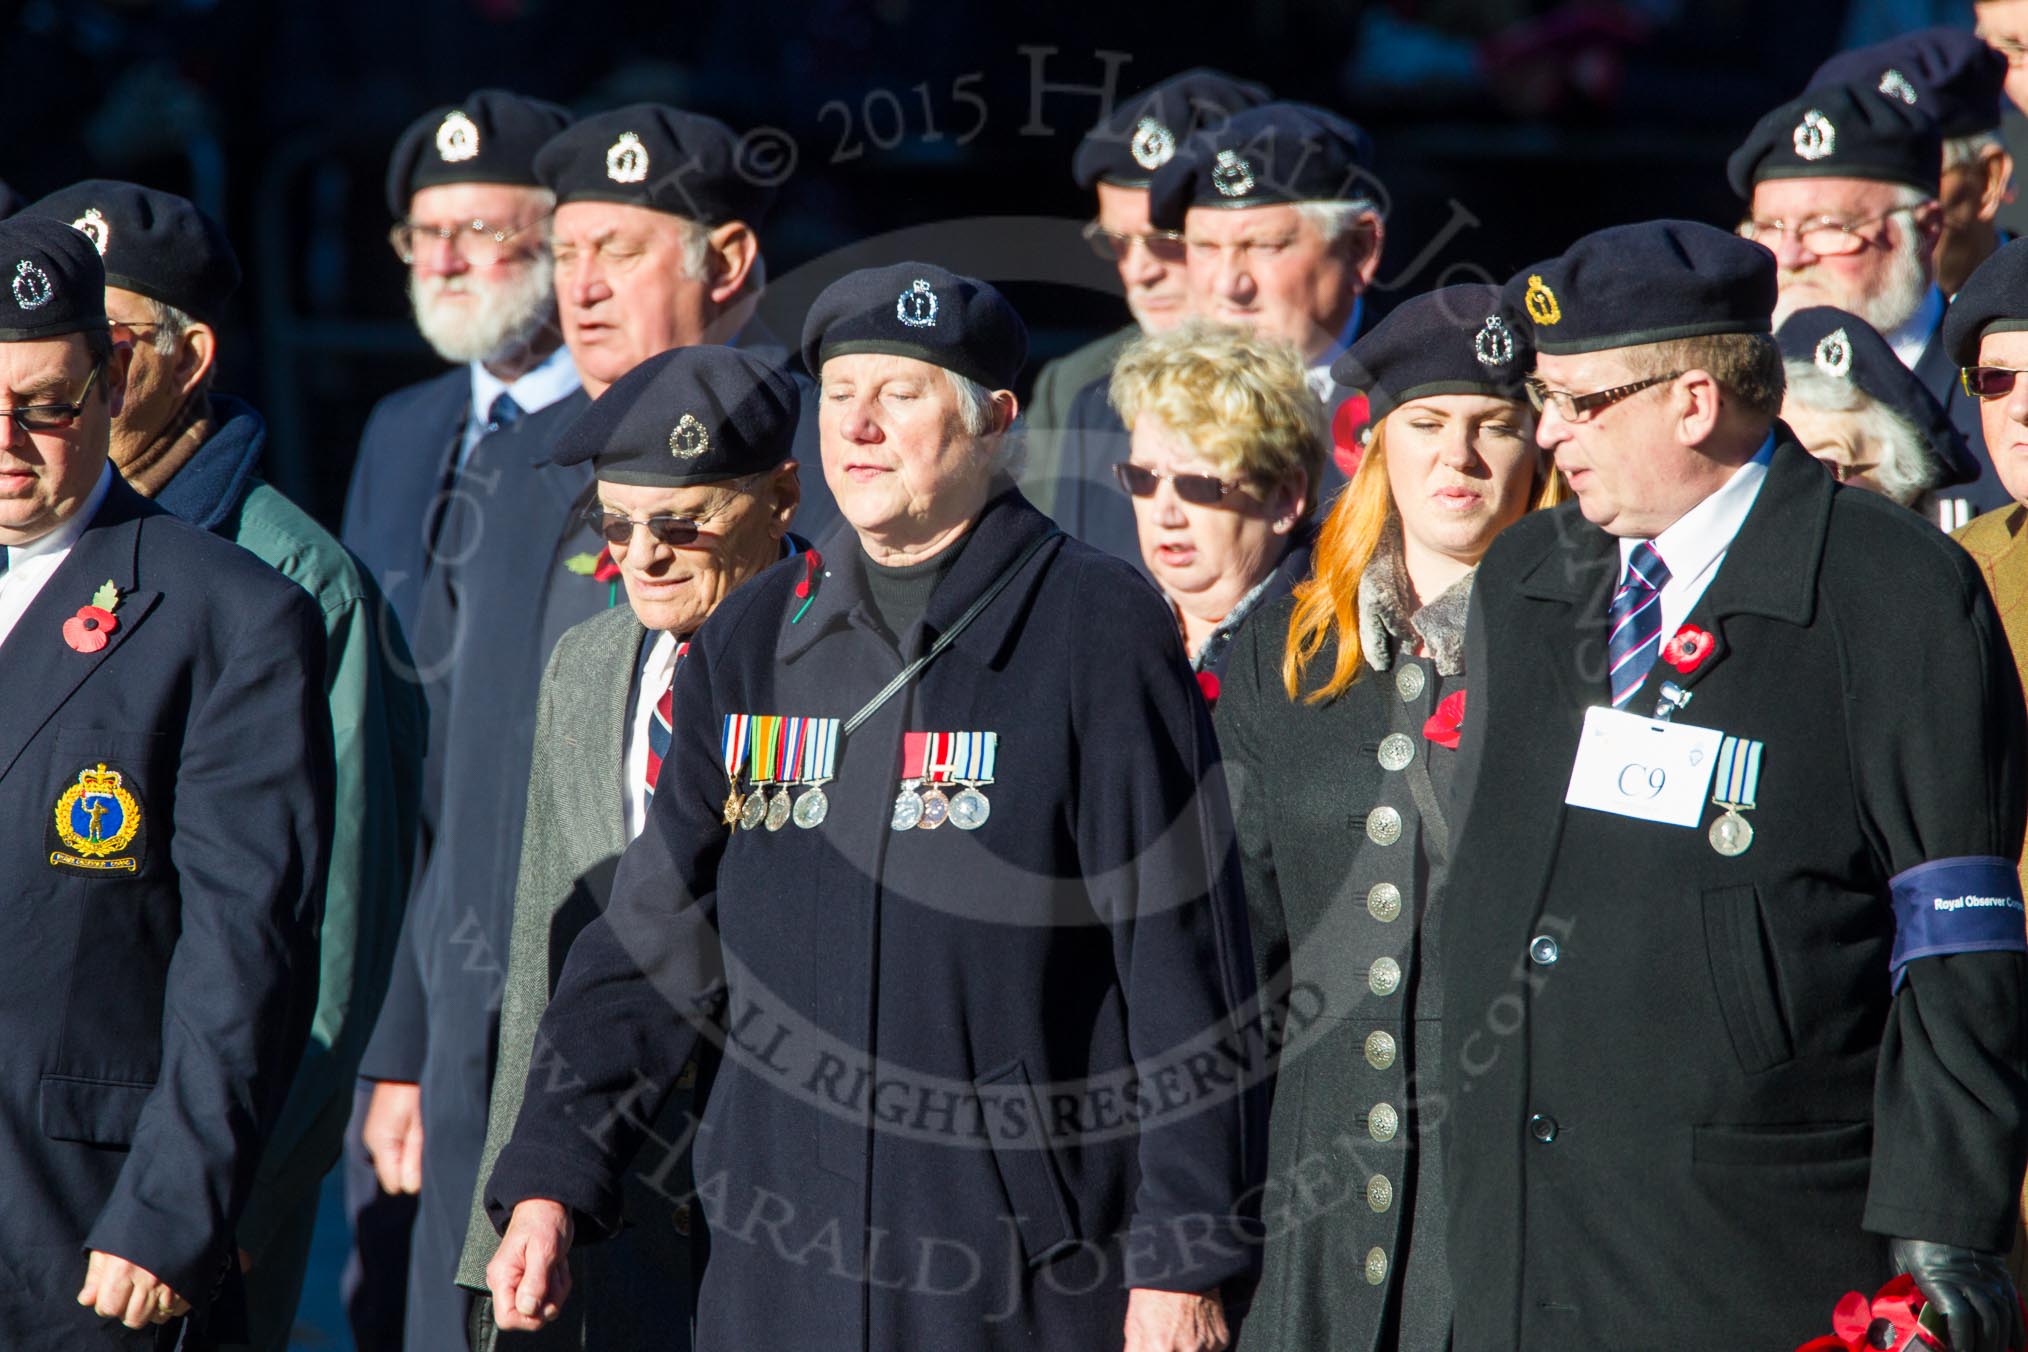 Remembrance Sunday Cenotaph March Past 2013: C9 - Royal Observer Corps Association..
Press stand opposite the Foreign Office building, Whitehall, London SW1,
London,
Greater London,
United Kingdom,
on 10 November 2013 at 12:07, image #1750